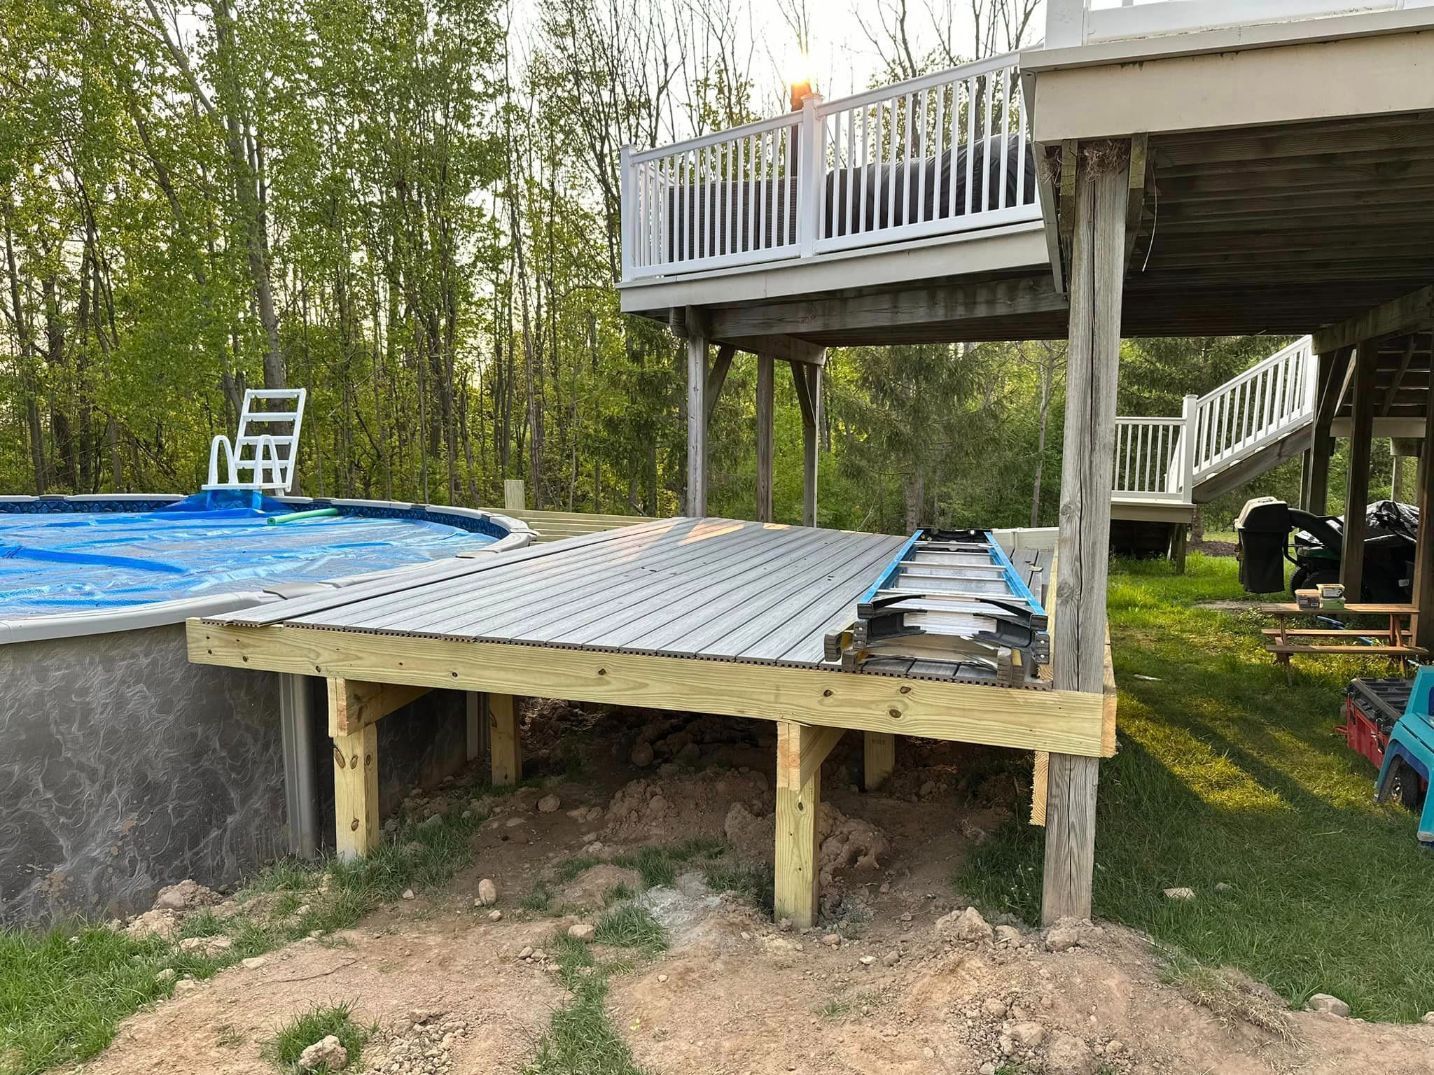 a ladder sits on a wooden deck next to a pool